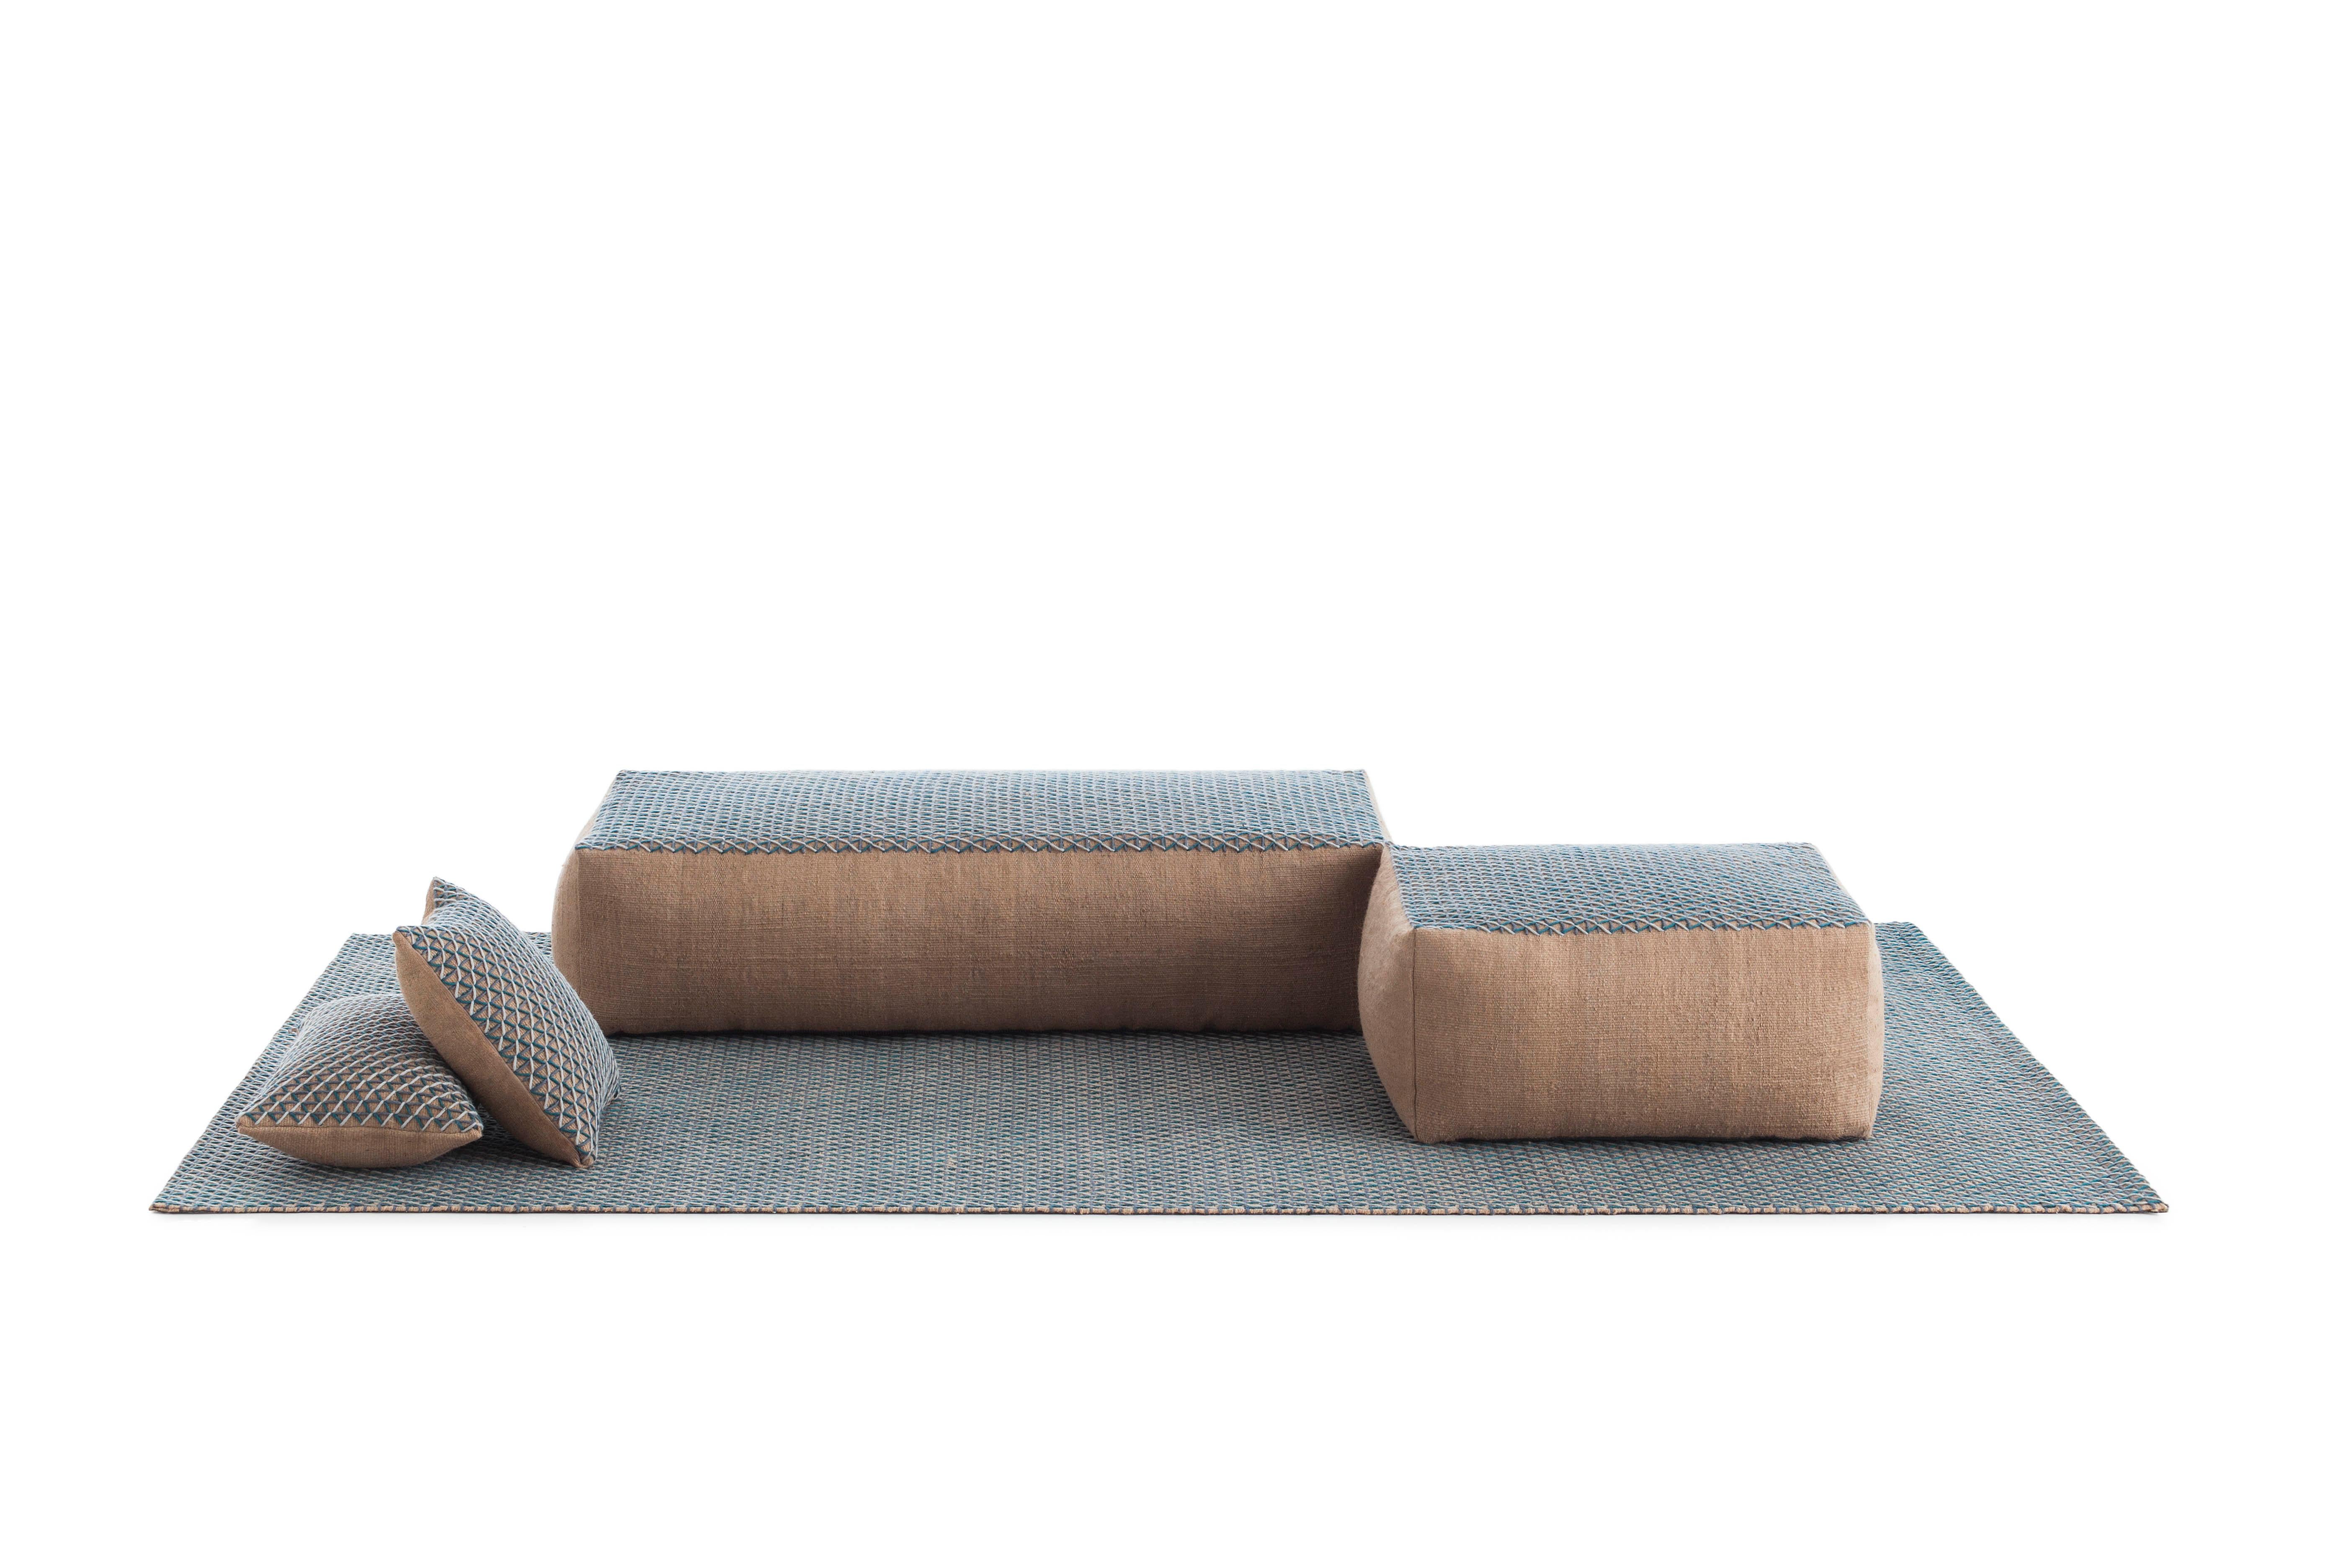 A smooth layer of wool is laid over the jute base, combining two seemingly discordant languages but which work here in harmony. The clean lines of the permeable geometry of this secondary overlay lend the classical material a contemporary and modern